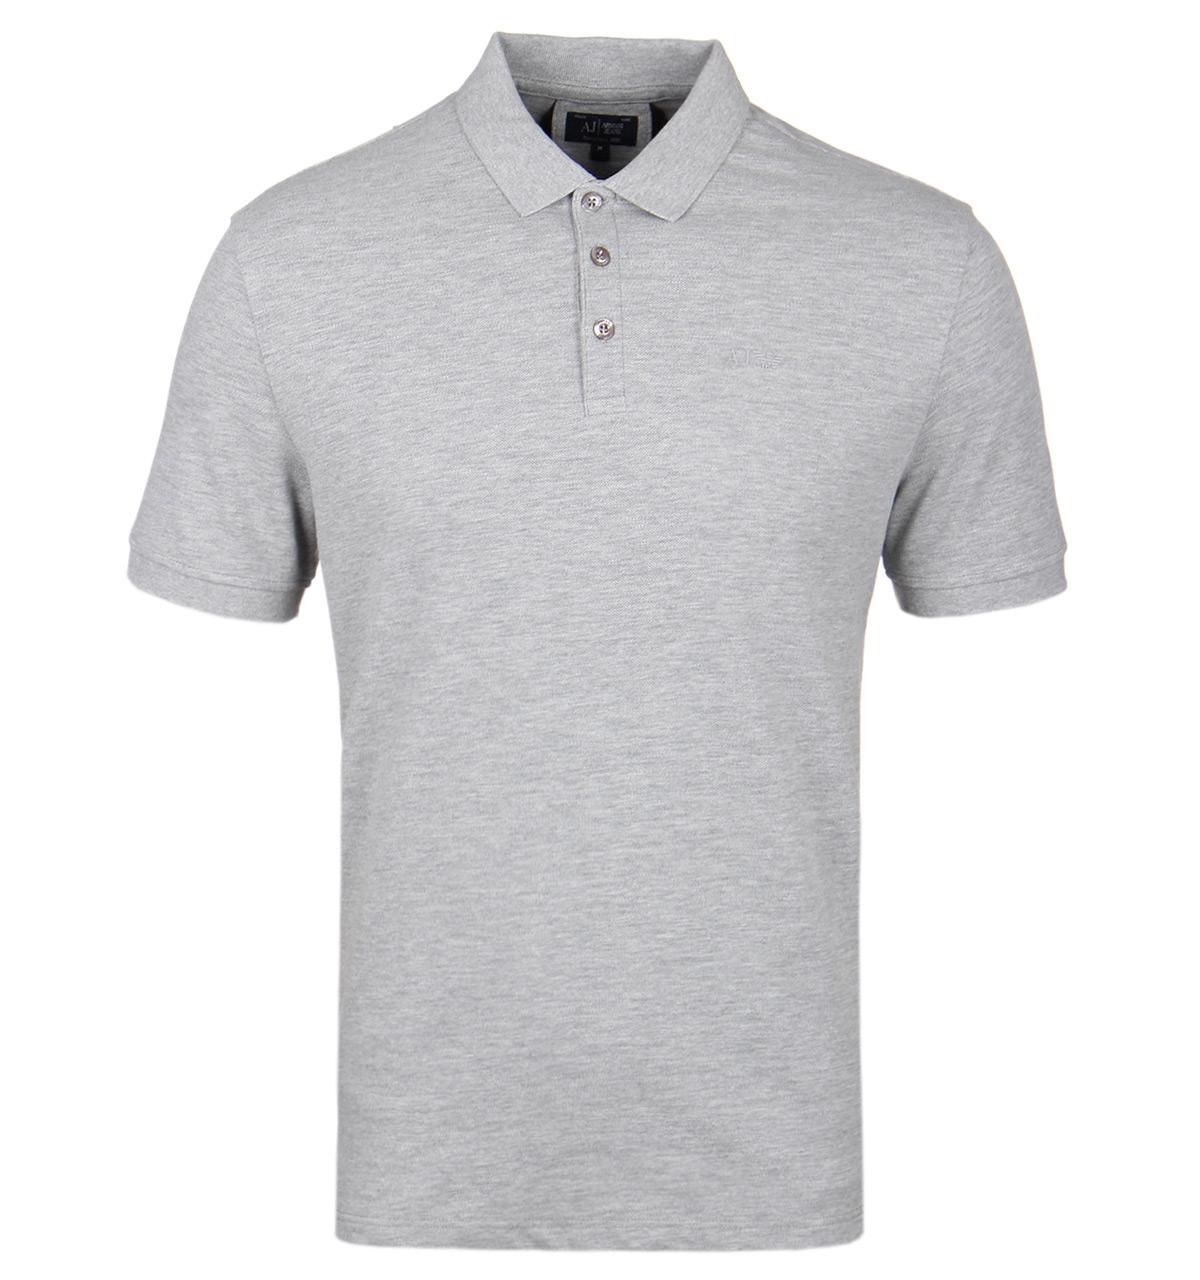 Lyst - Armani jeans Light Grey Marl Pique Polo Shirt in Grey for Men